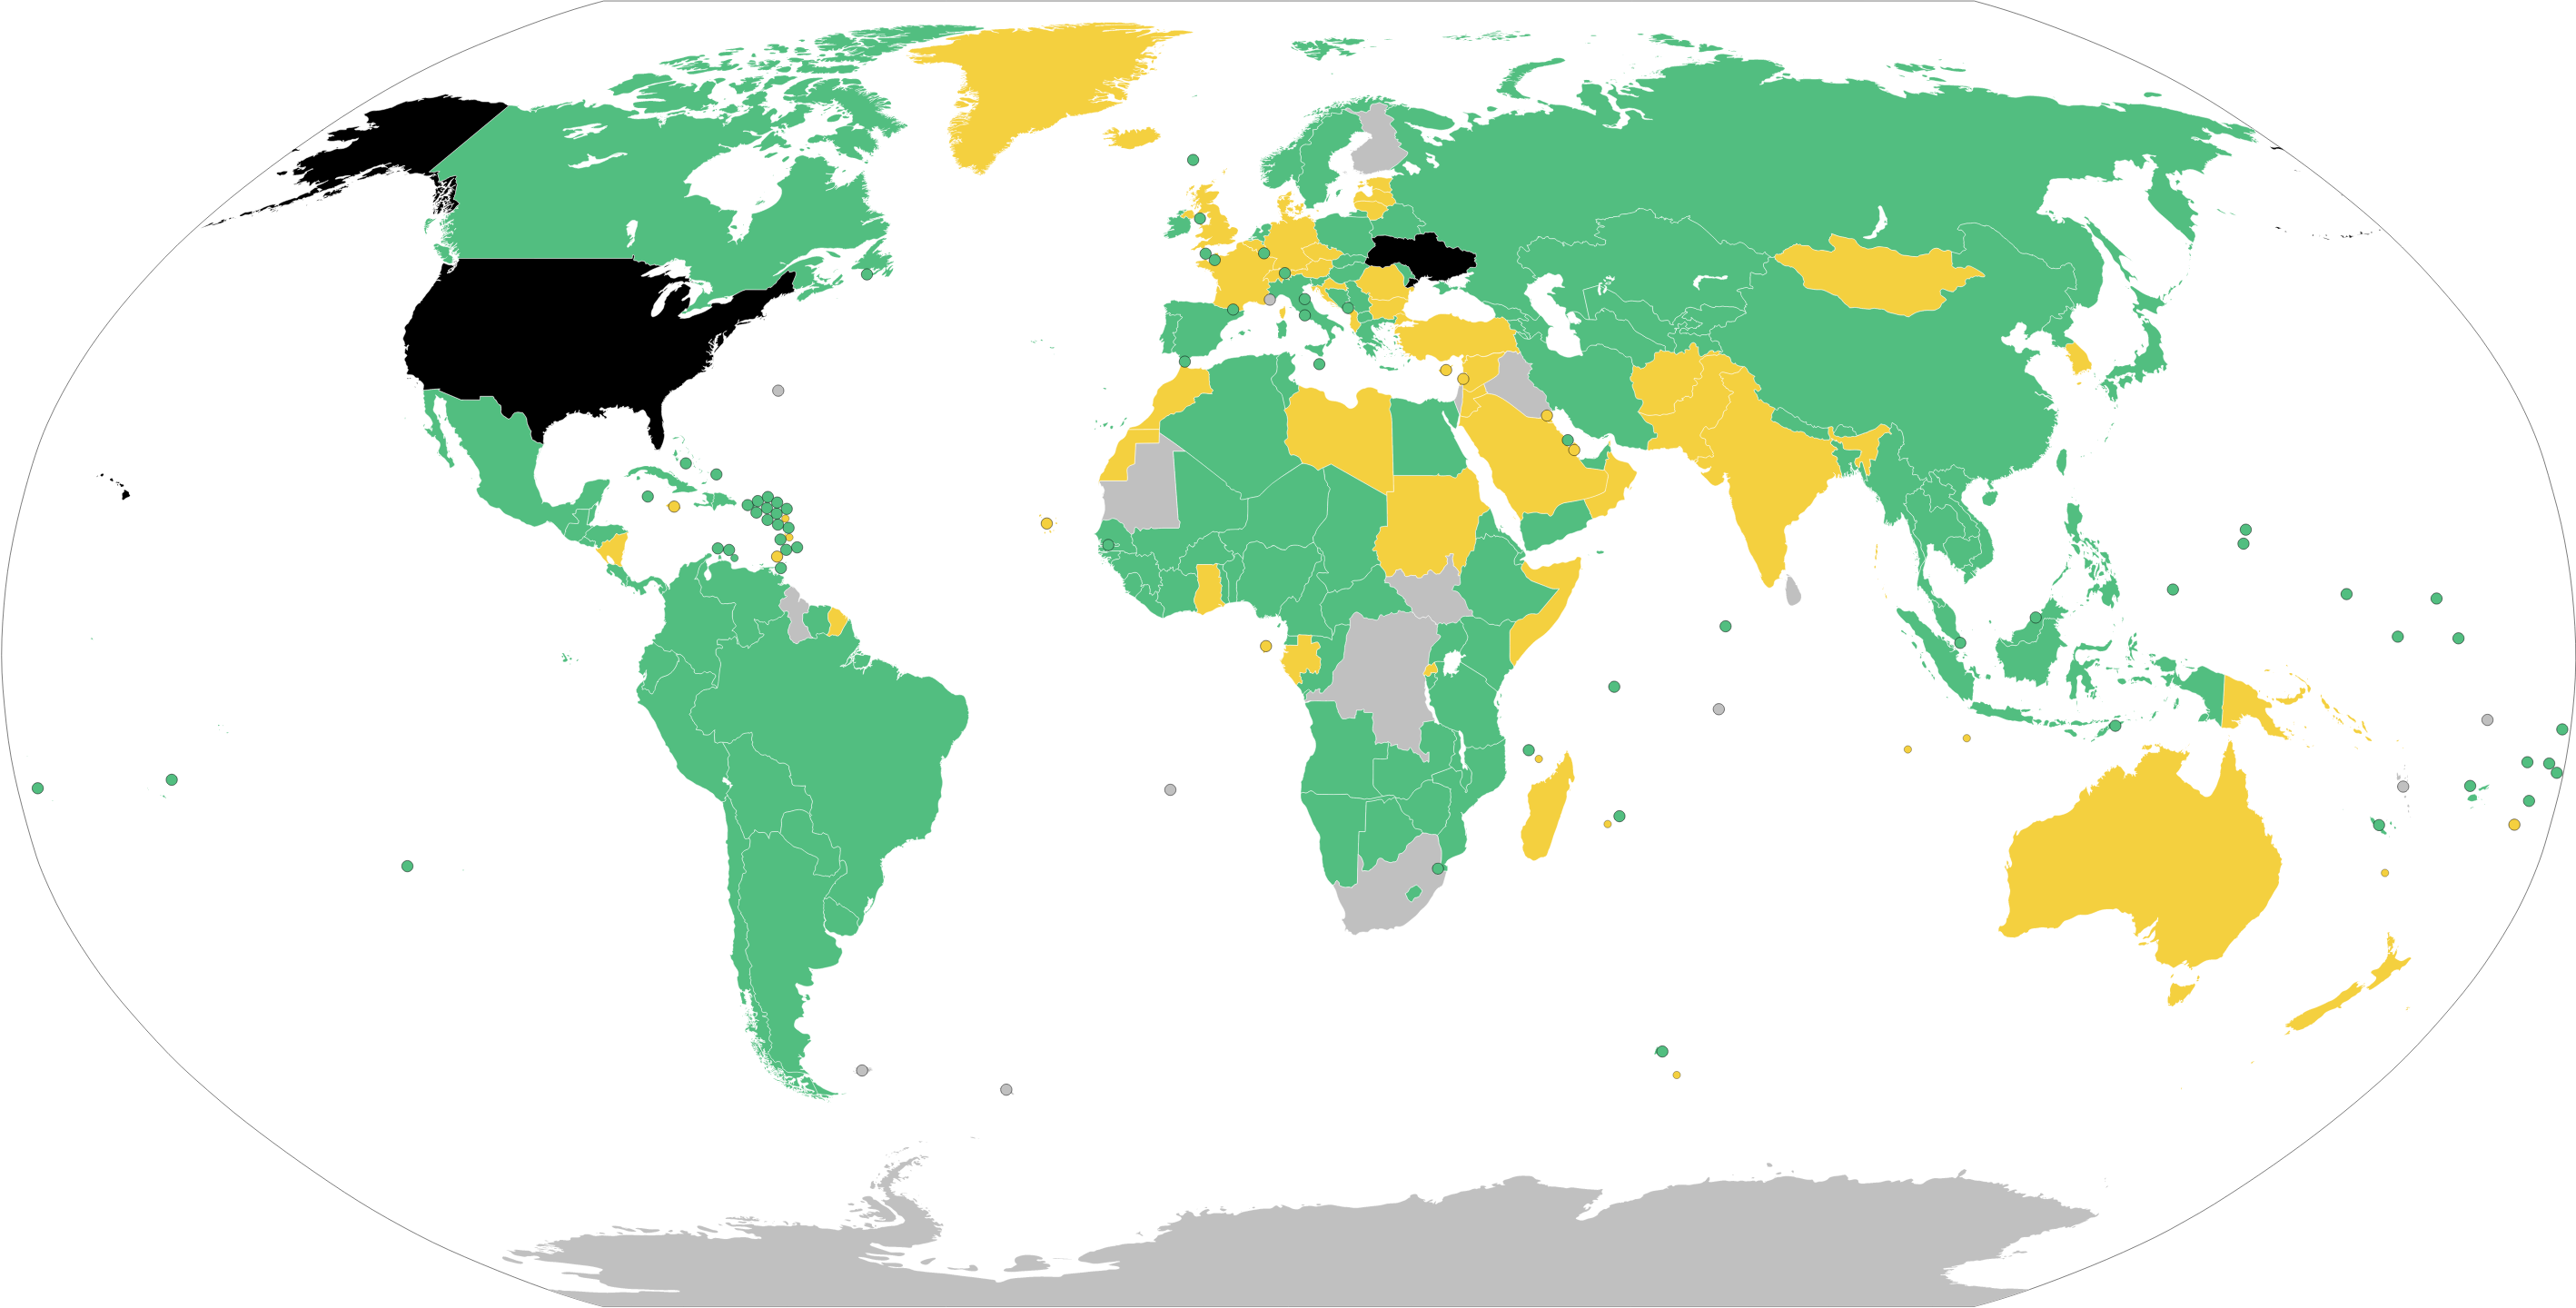 Votes on the UN resolution A/RES/75/169, "Yes"=green, "Abstained"=yellow, "Did not vote"=gray, "No"=black.